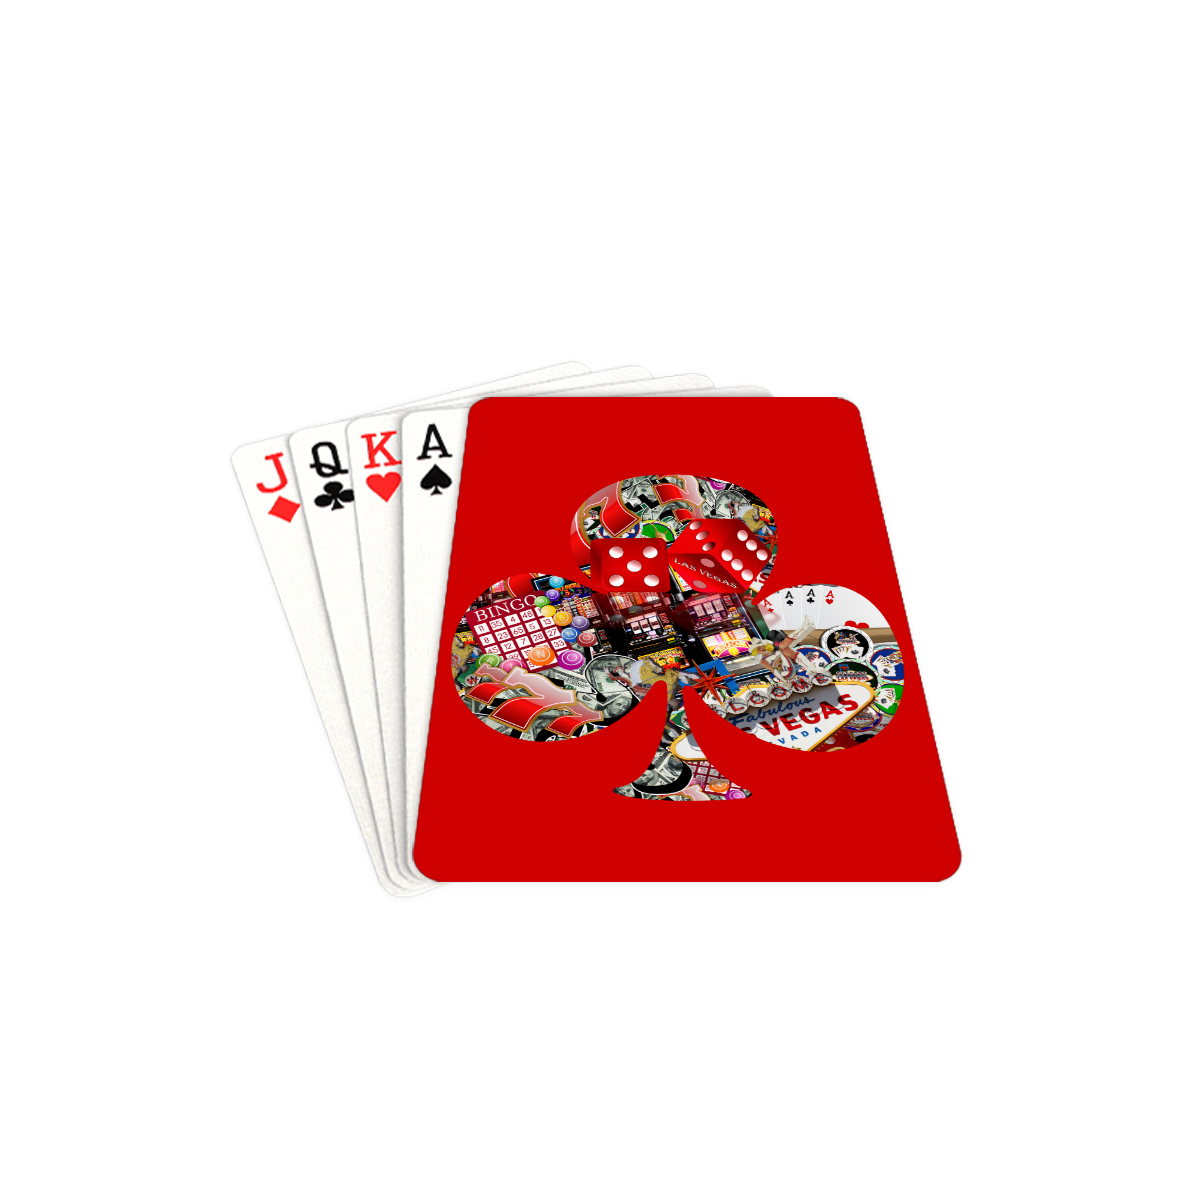 Club Playing Card Shape - Las Vegas Icons on Red Playing Cards 2.5"x3.5"